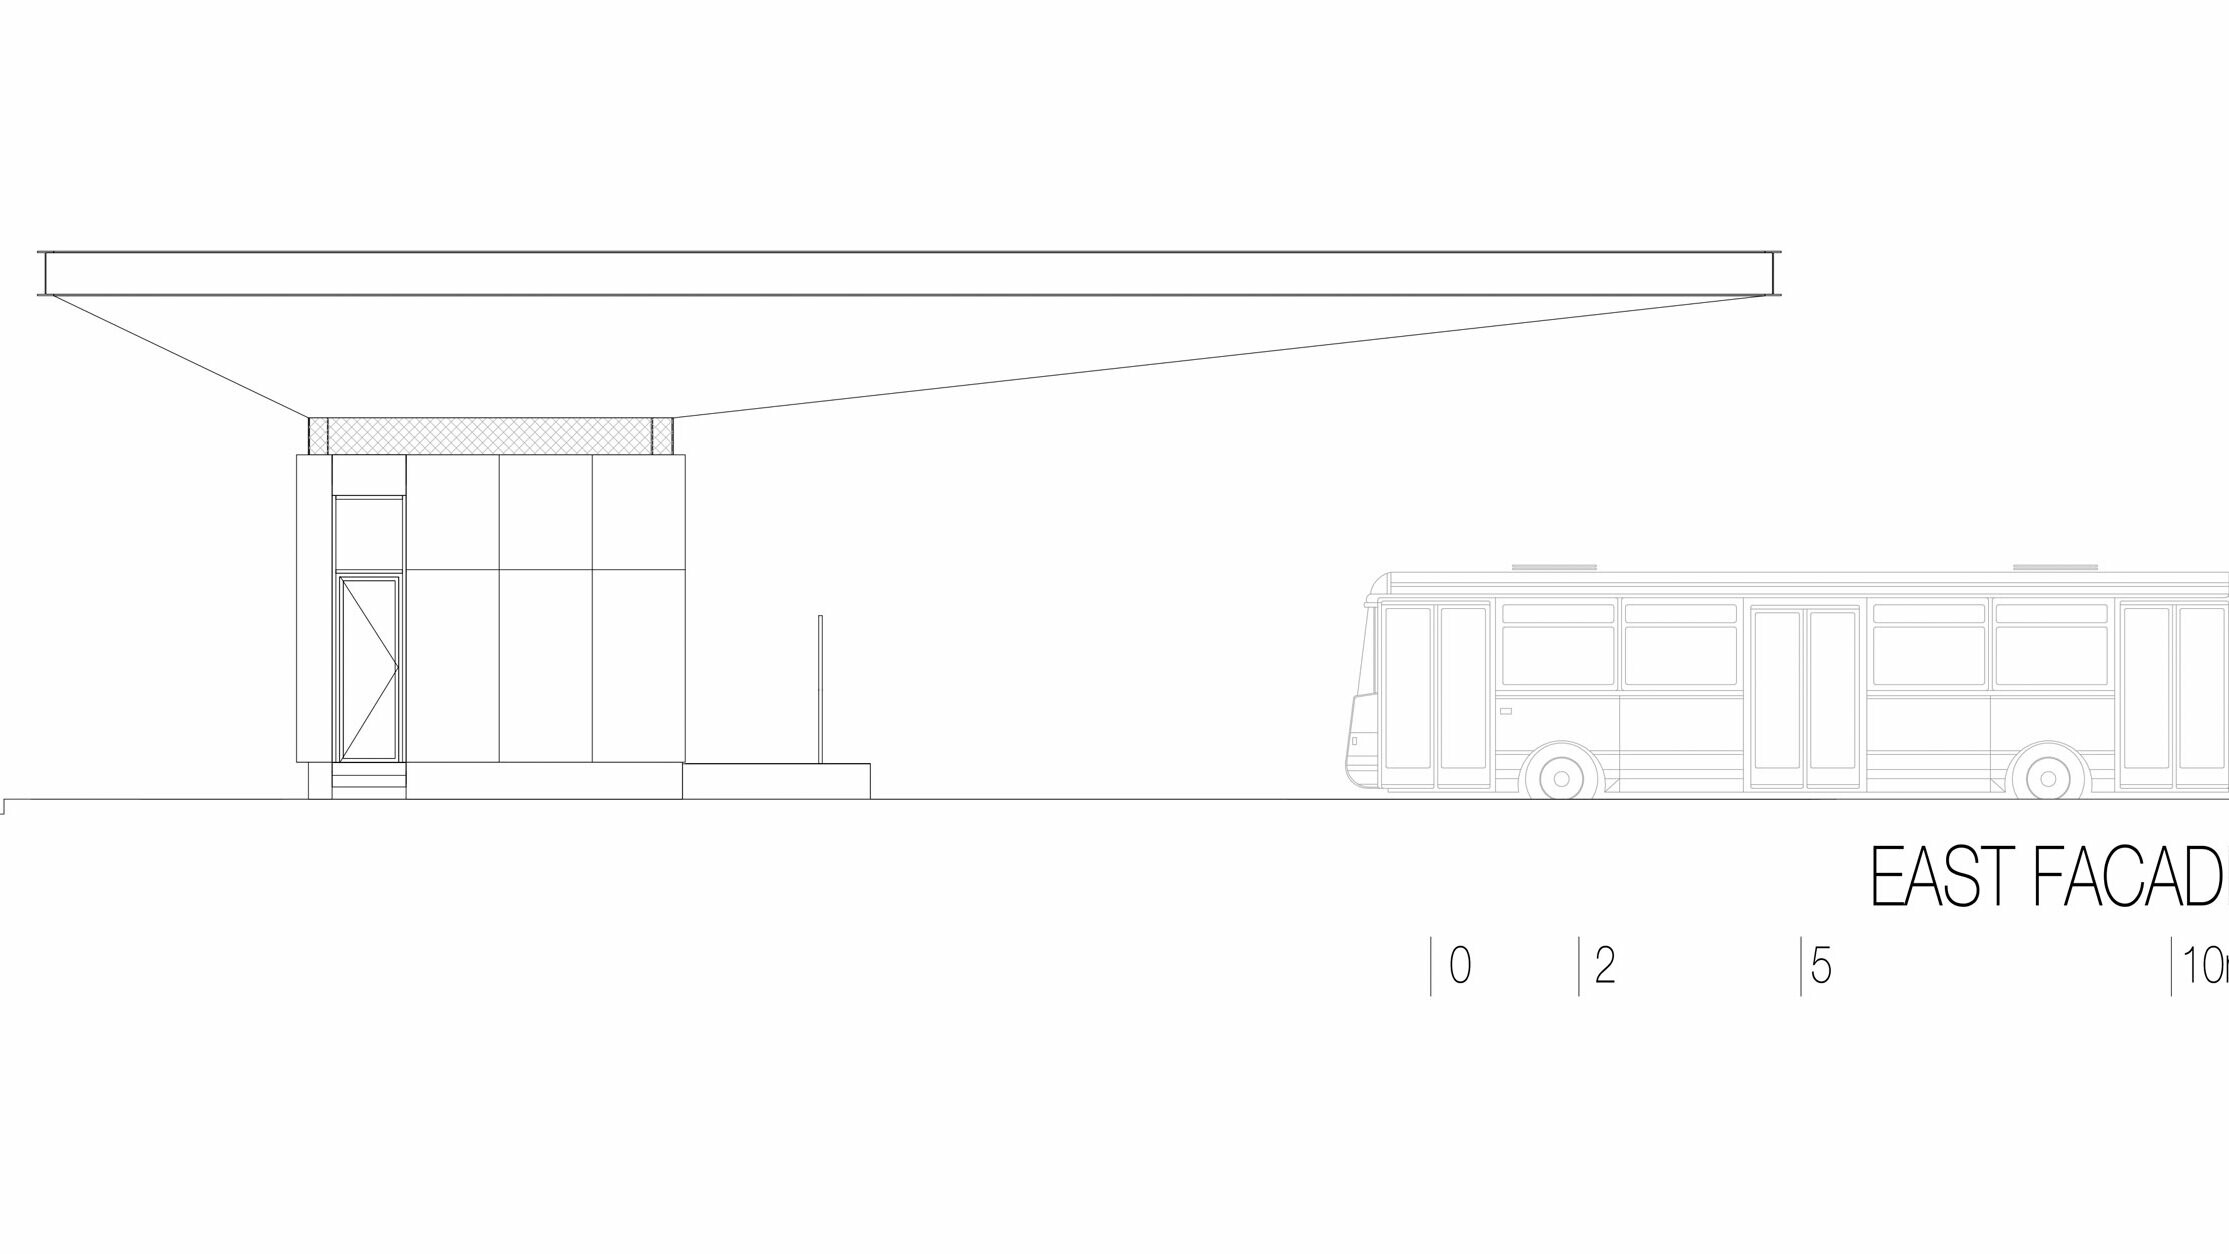 The drawing shows the eastern view of the "Autobusni Kolodvor Slavonski Brod" bus stop in Croatia. The illustration emphasises the slender, horizontal structure of the white PREFA Prefalz roof, which extends over the entire length of the building. Under the roof is a rectangular structure with clear lines and large glass surfaces. A bus can be seen on the right-hand side of the drawing, which emphasises the proportions of the bus stop in relation to a vehicle. The eastern view highlights the modern and functional architecture of the bus stop, which creates a bright and inviting atmosphere through the use of glass and aluminium.